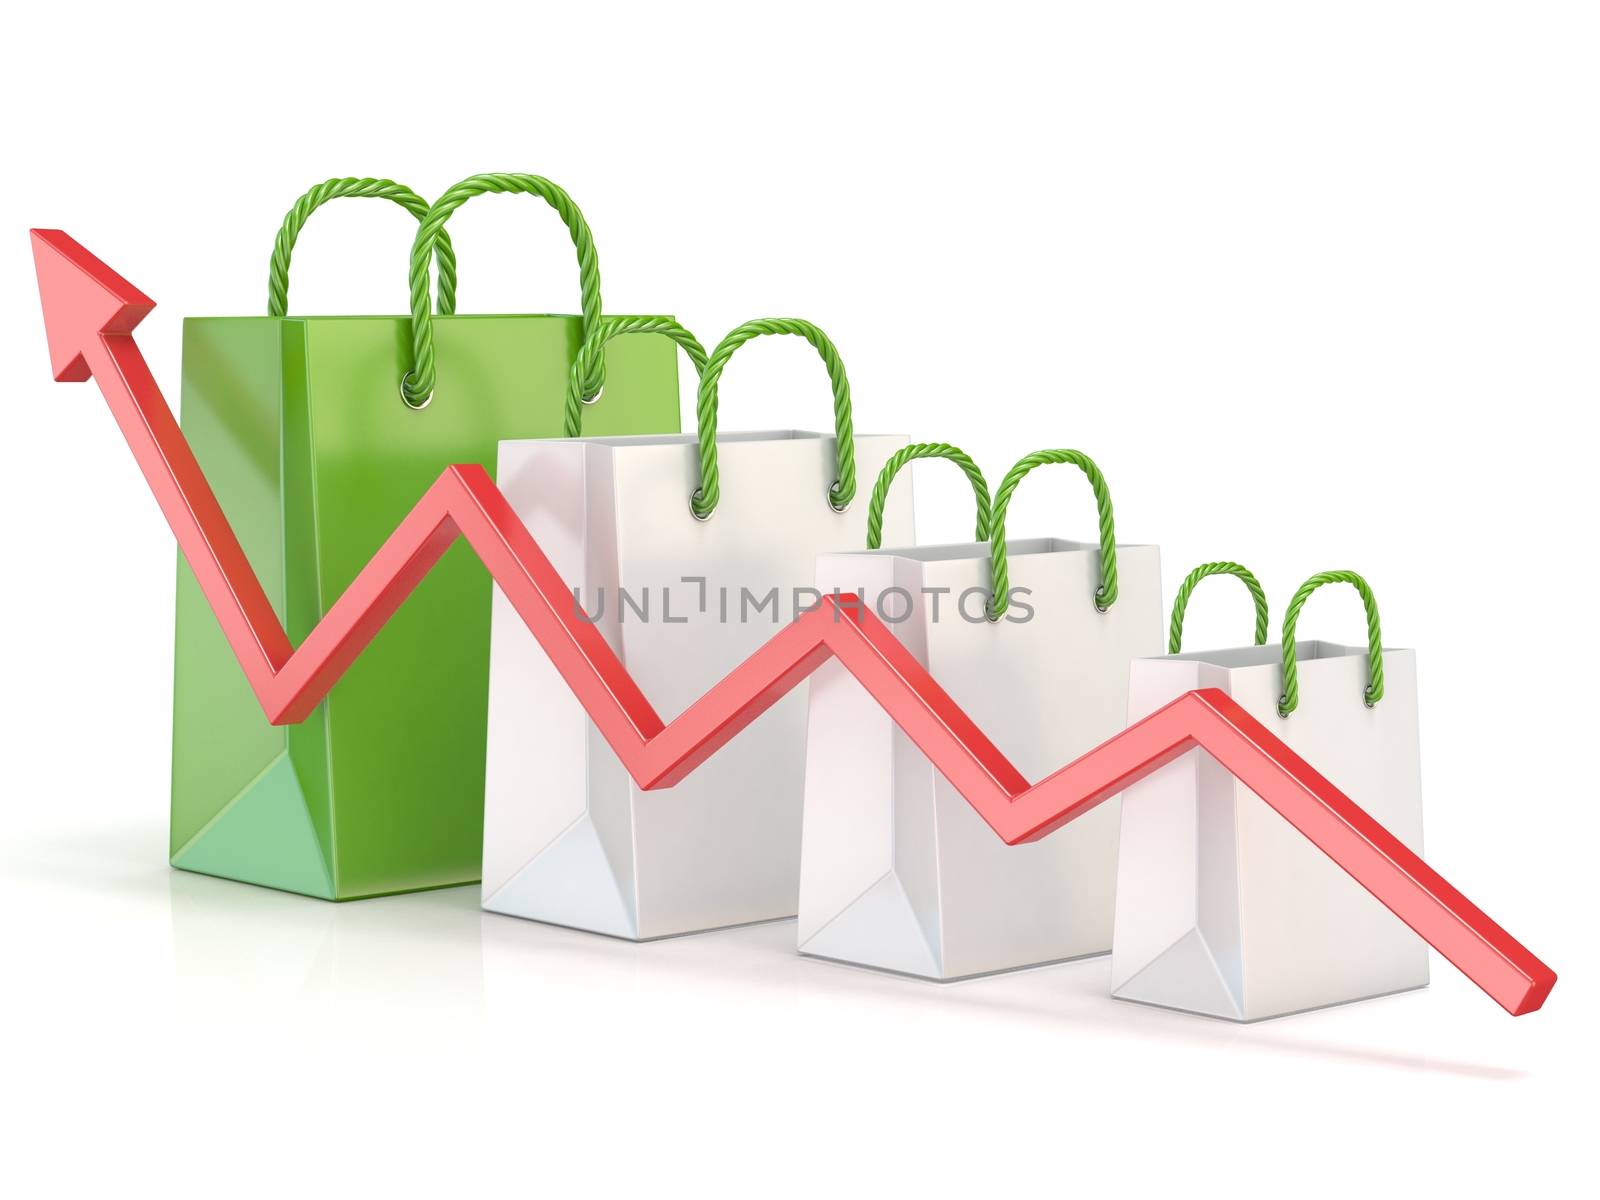 Shopping bag increasing chart. Sales growth chart. 3D render illustration isolated on white background